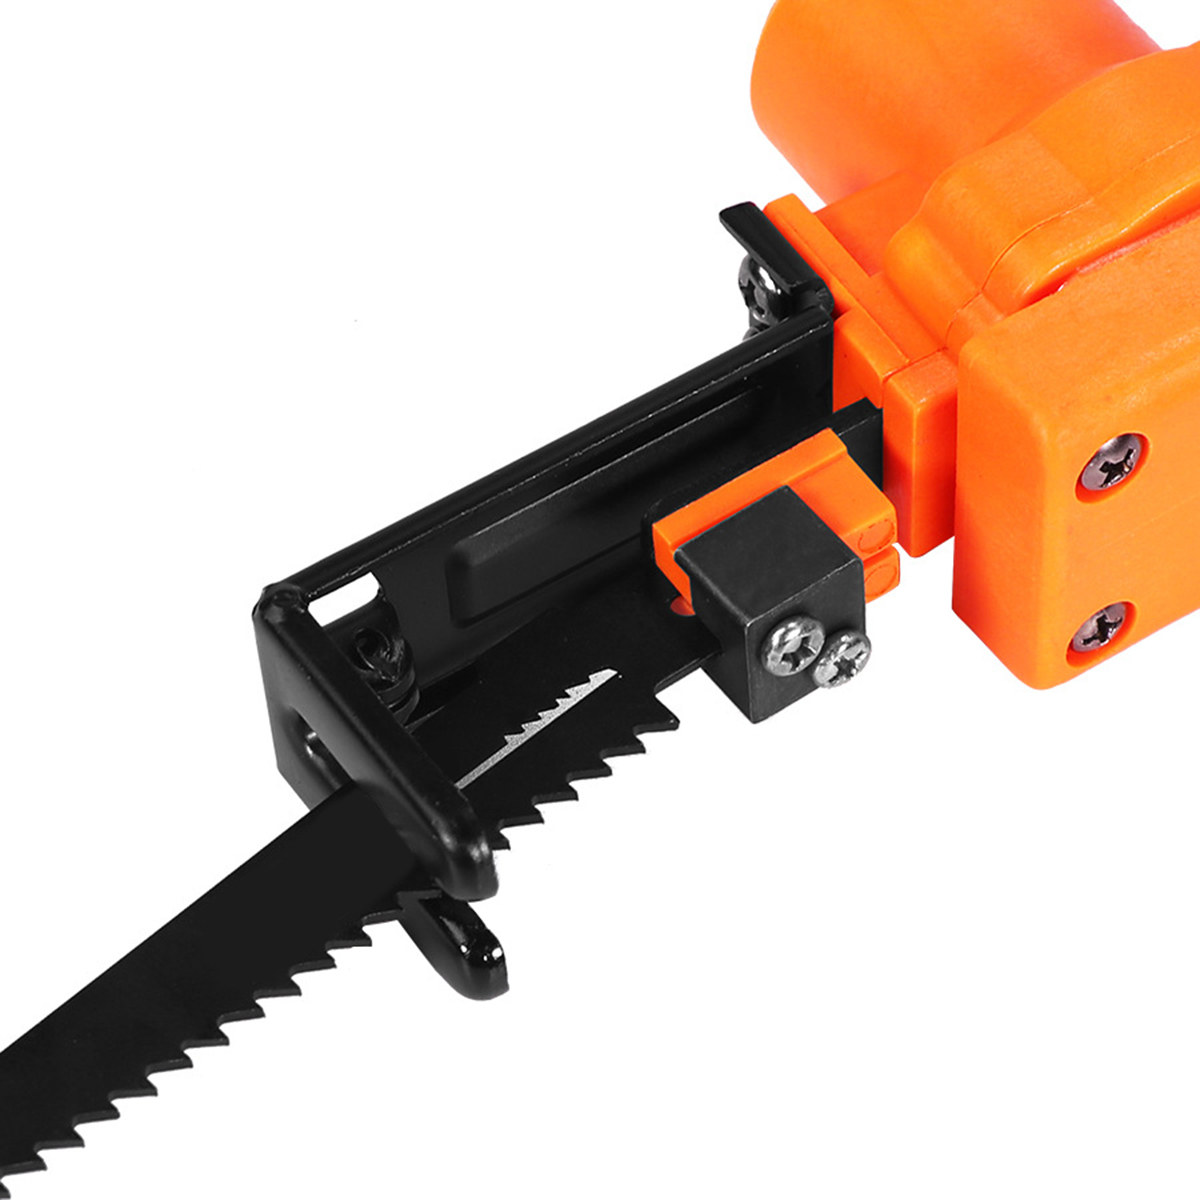 Reciprocating-Saw-Attachment-Adapter-Change-Electric-Drill-Into-Reciprocating-Saw-for-Wood-Metal-Cut-1725363-6